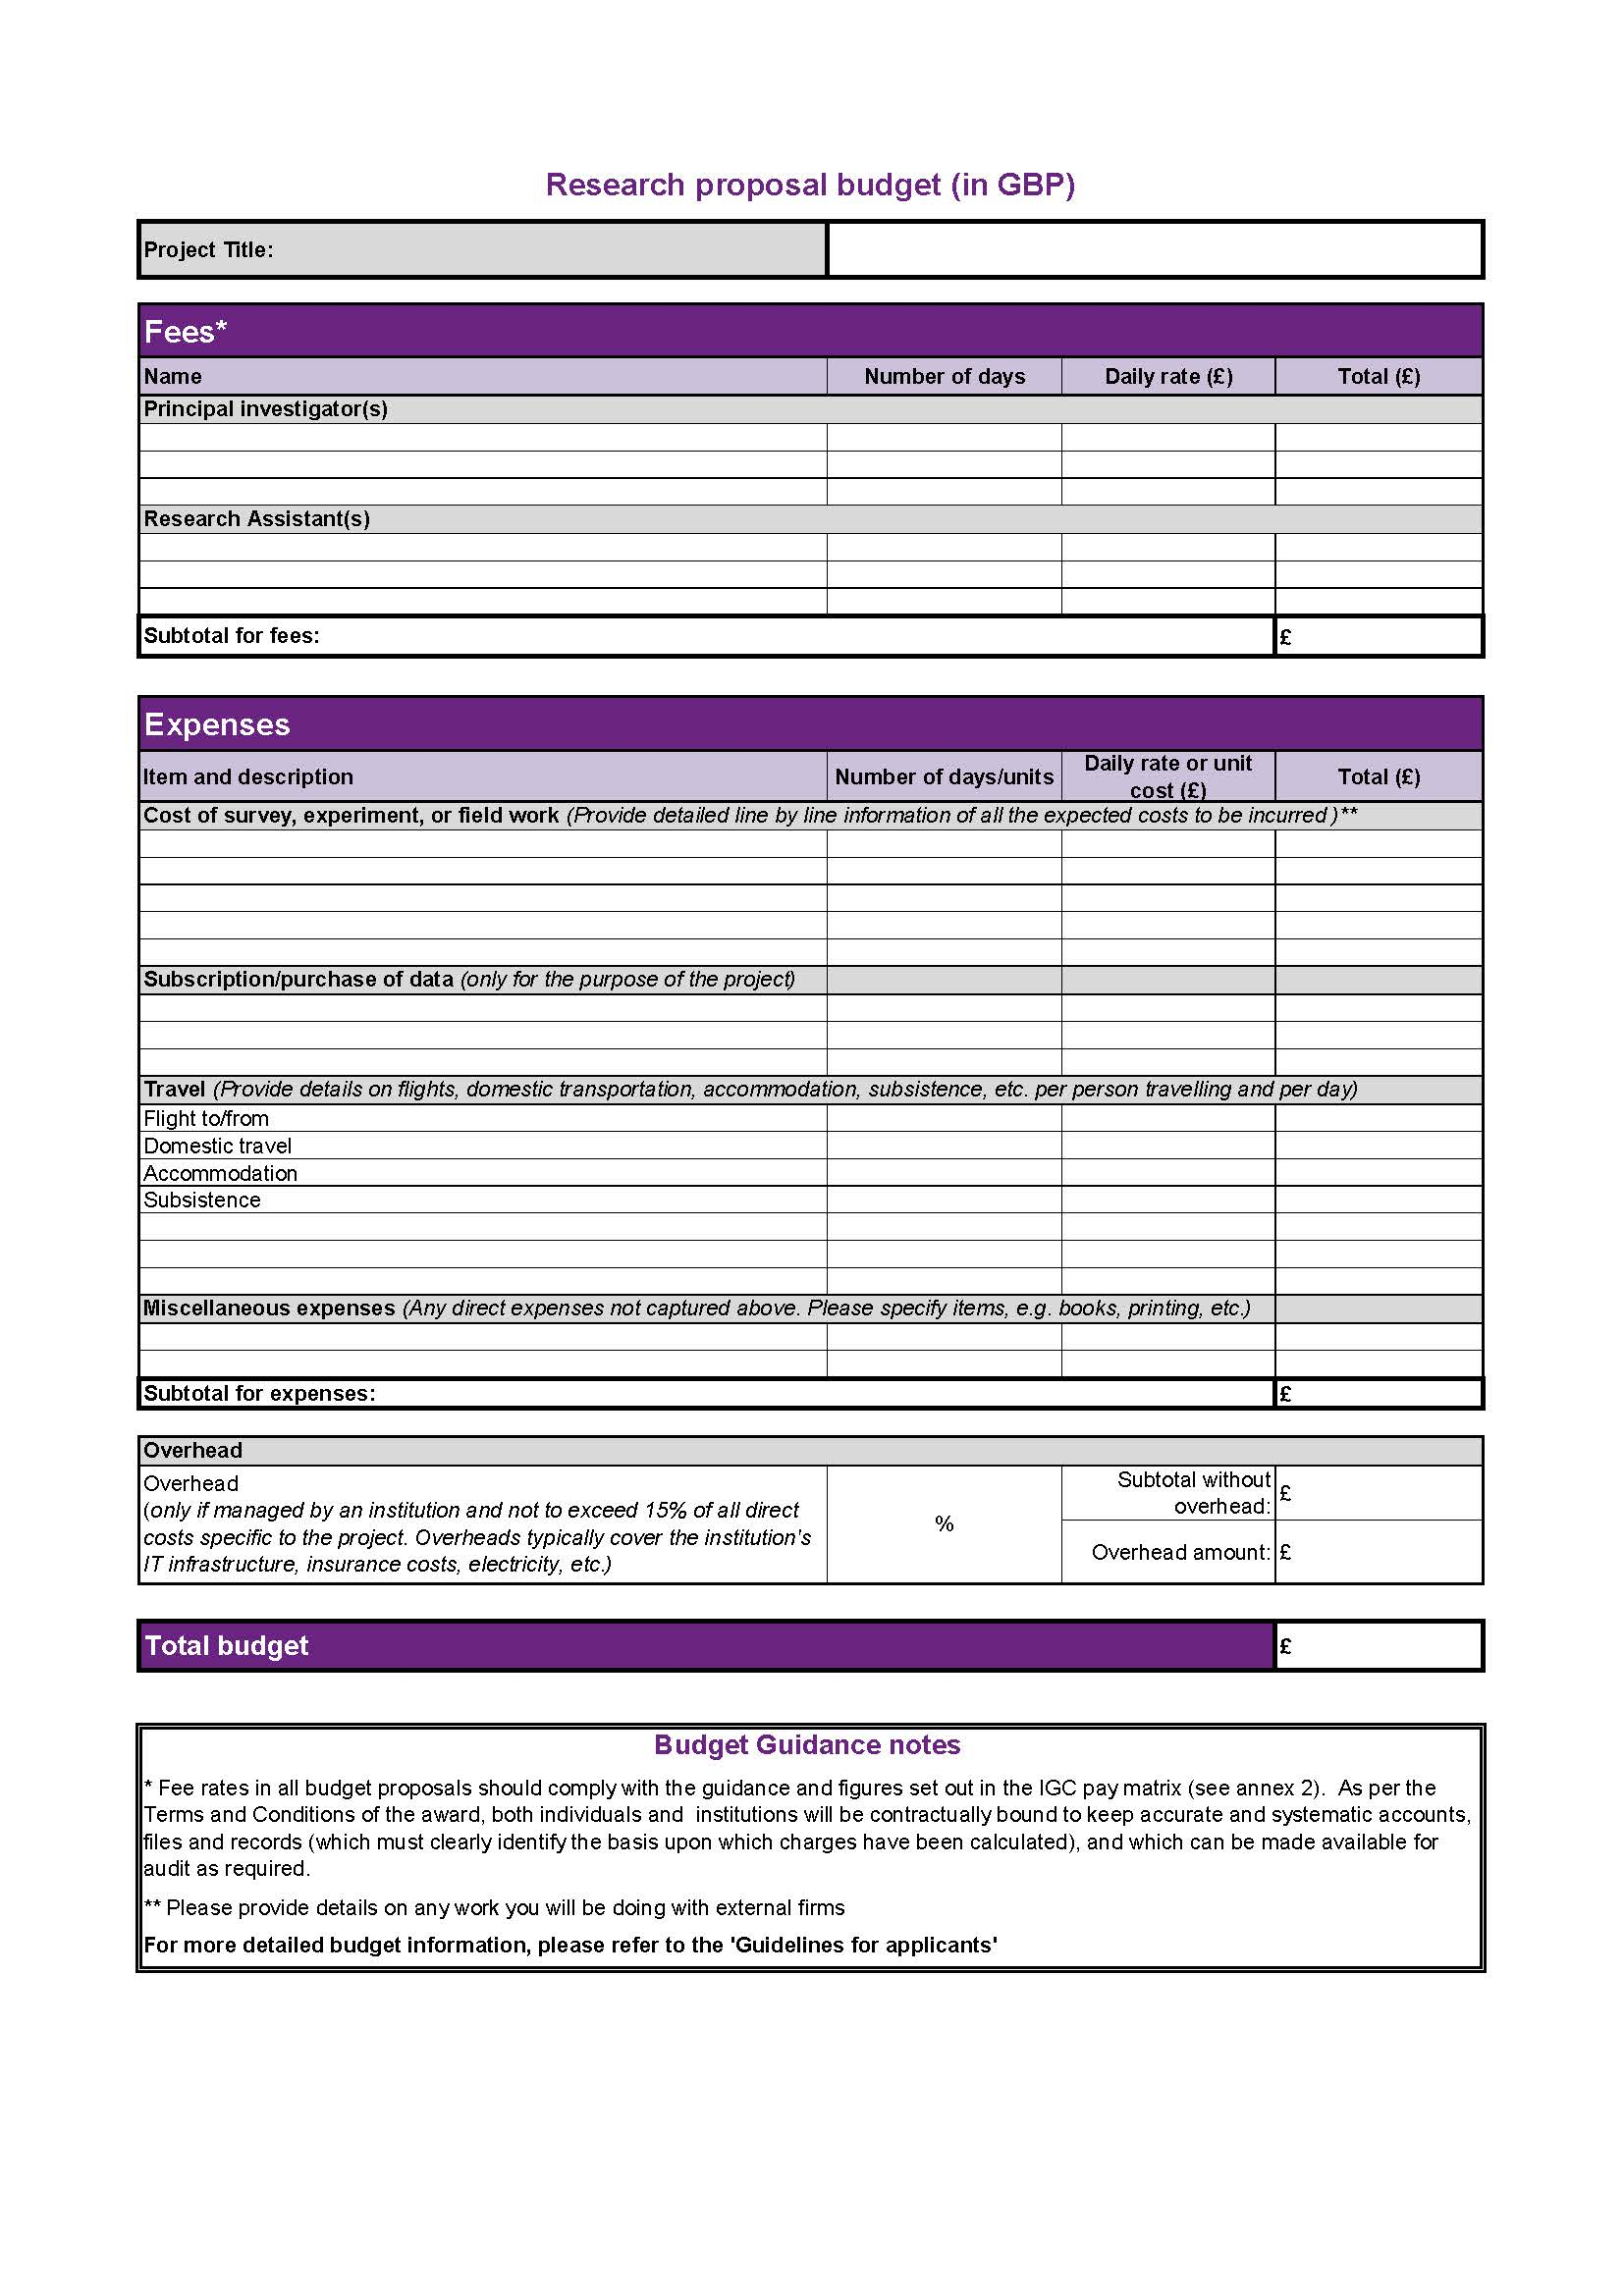 Project budget template - IGC Intended For Overhead Budget Template Intended For Overhead Budget Template